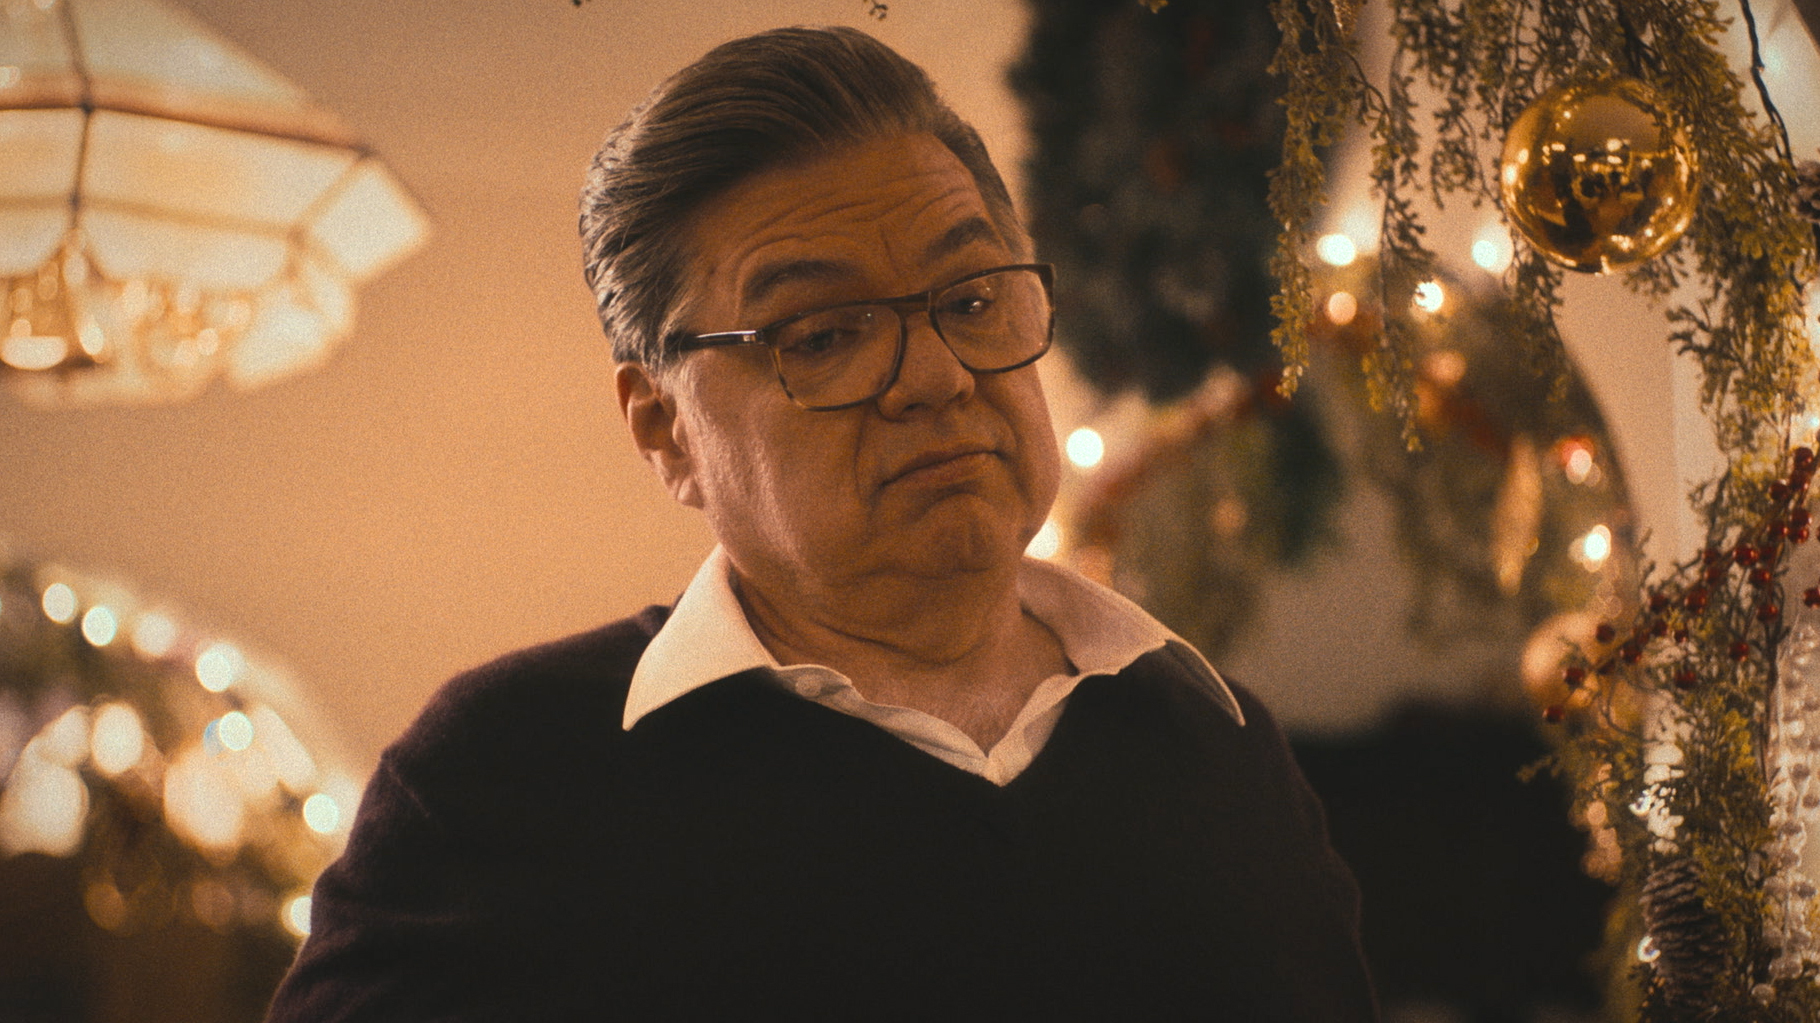 Oliver Platt in glasses, a sweater and collared shirt in a holiday episode of The Bear